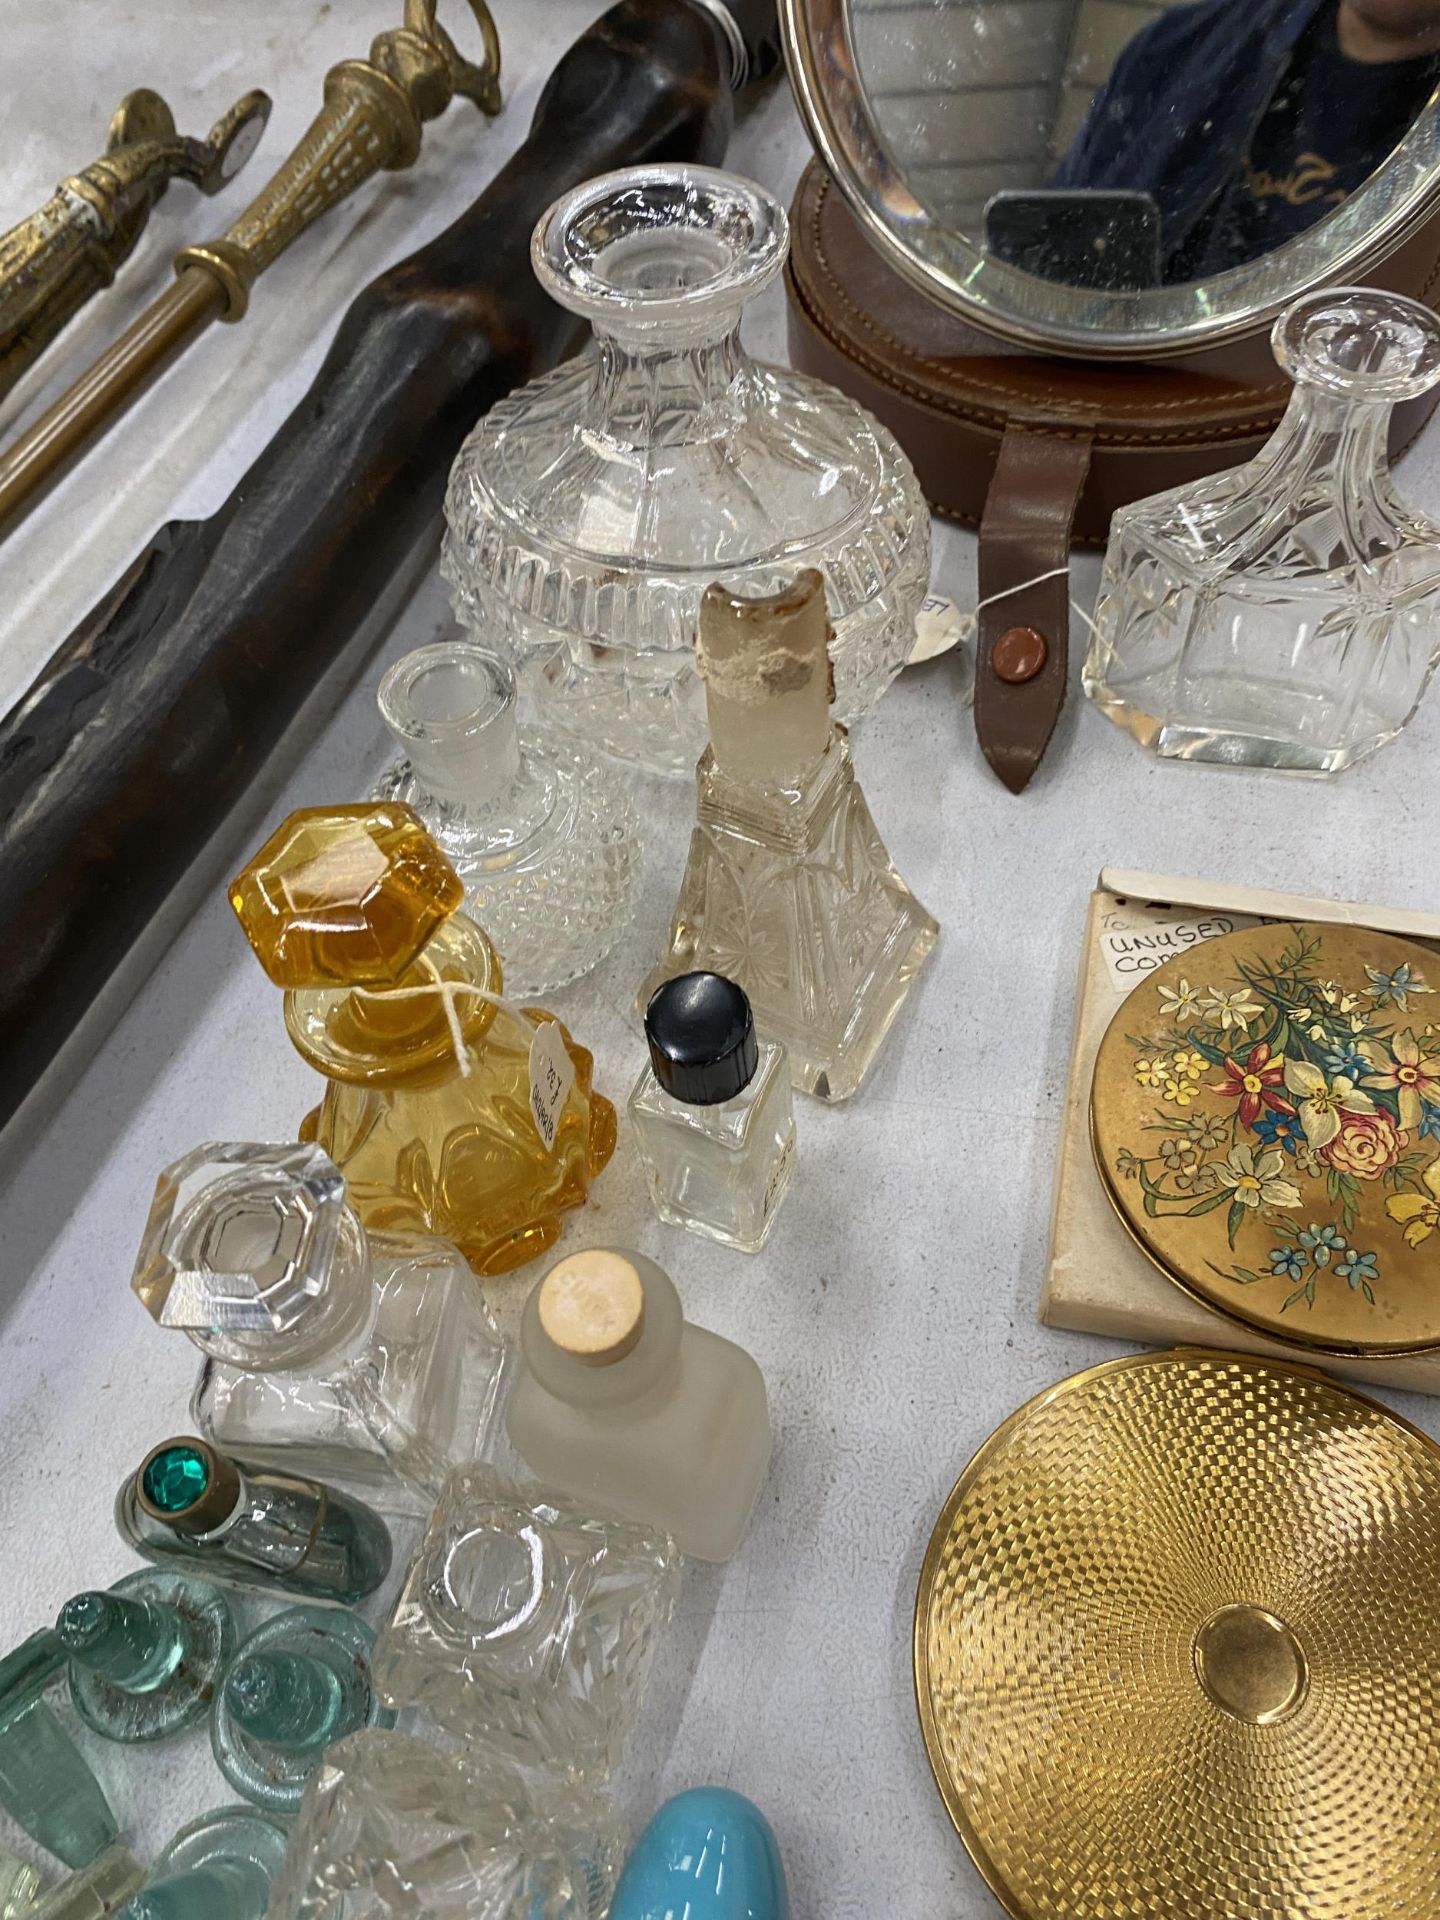 A COLLECTION OF SMALL GLASS VINTAGE SCENT BOTTLES, COMPACTS, A CASED VANITY MIRROR, ETC - Image 4 of 4